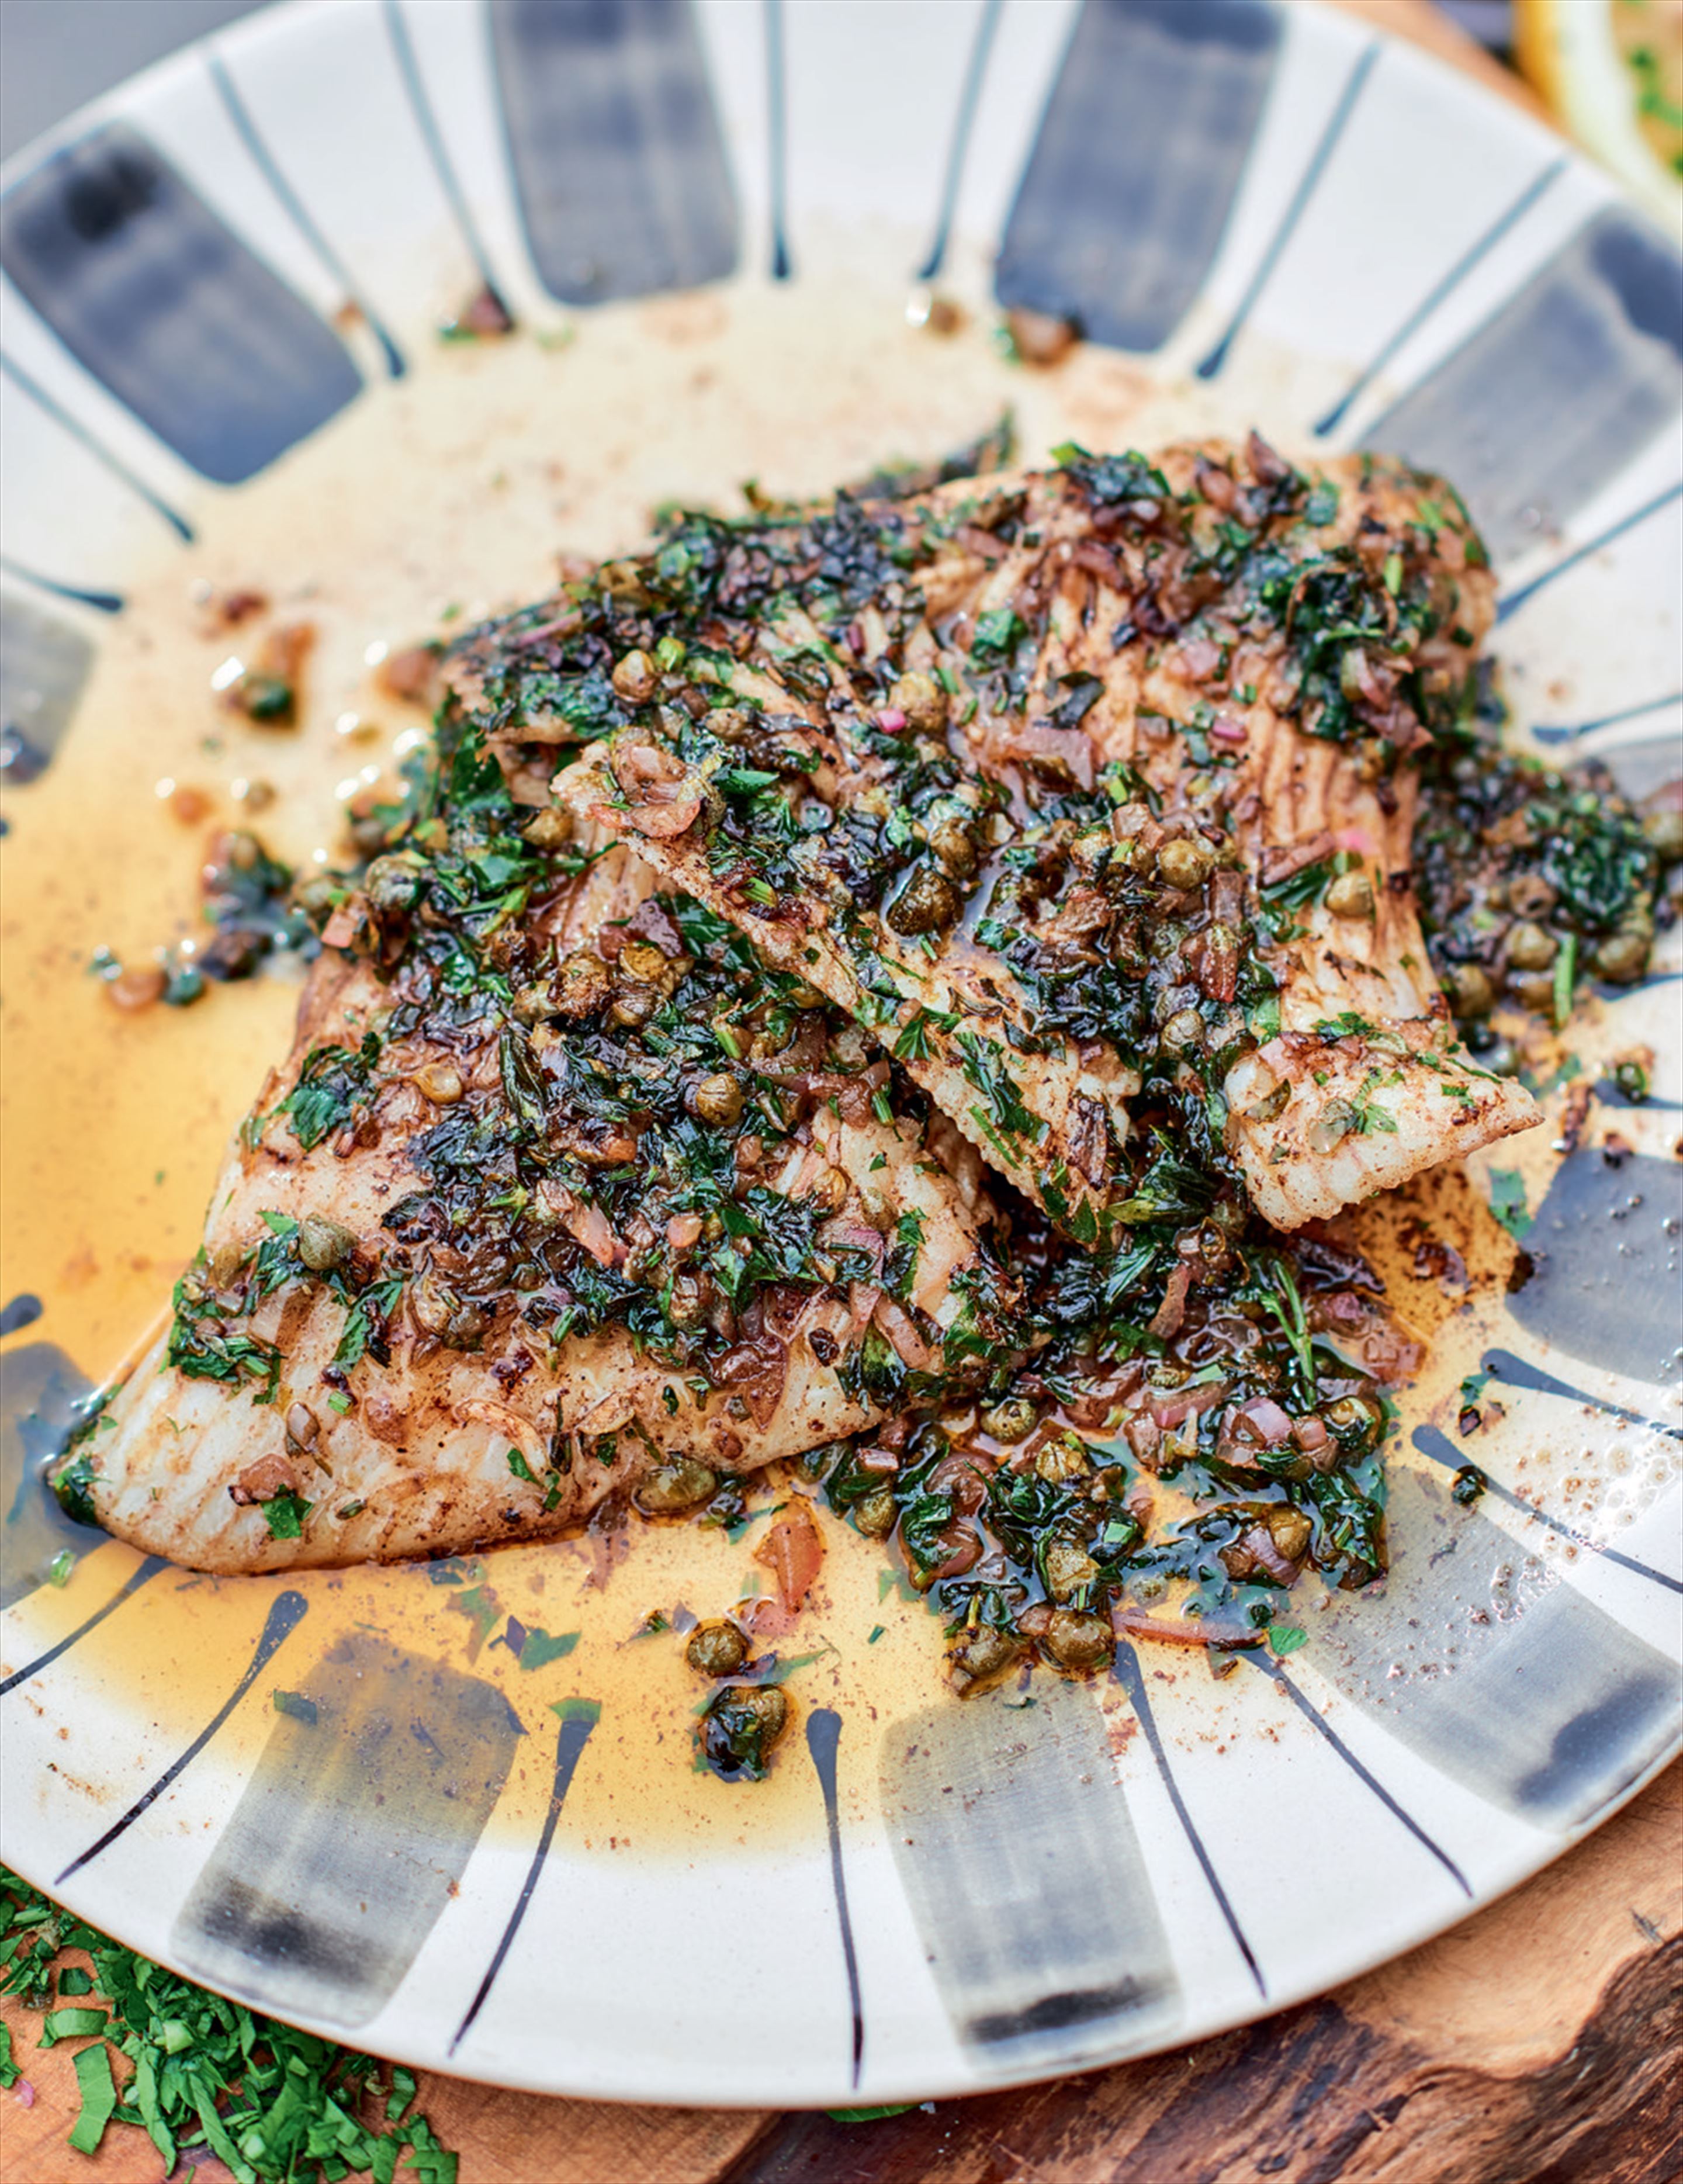 Pan-fried skate wing with nut-brown butter